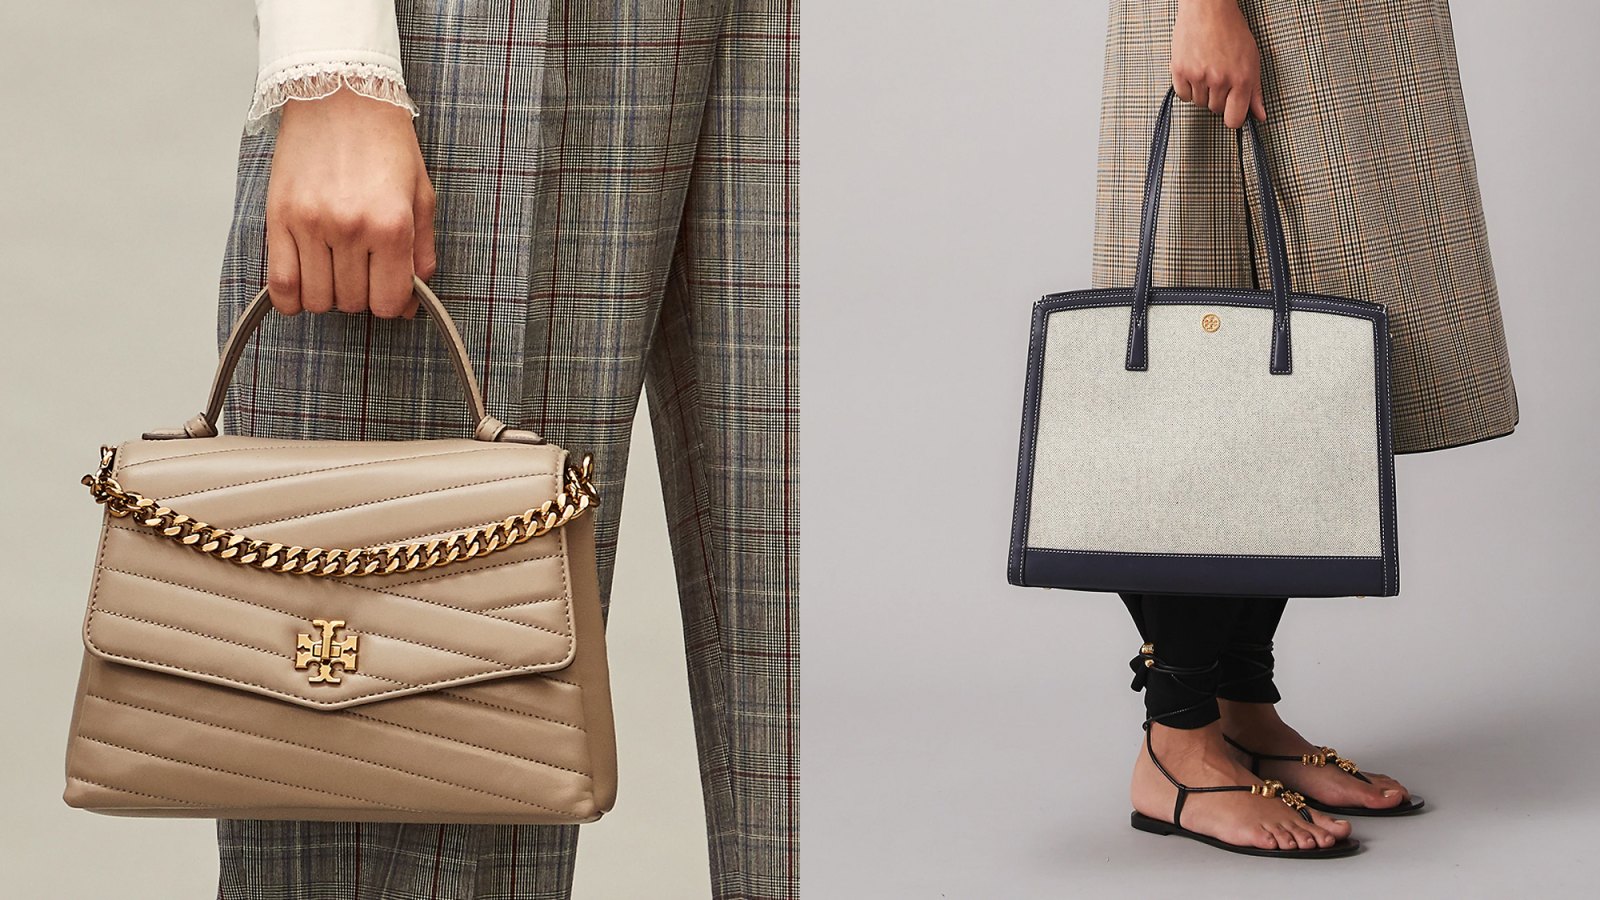 Tory Burch on Instagram: The new Robinson. A compact shoulder bag